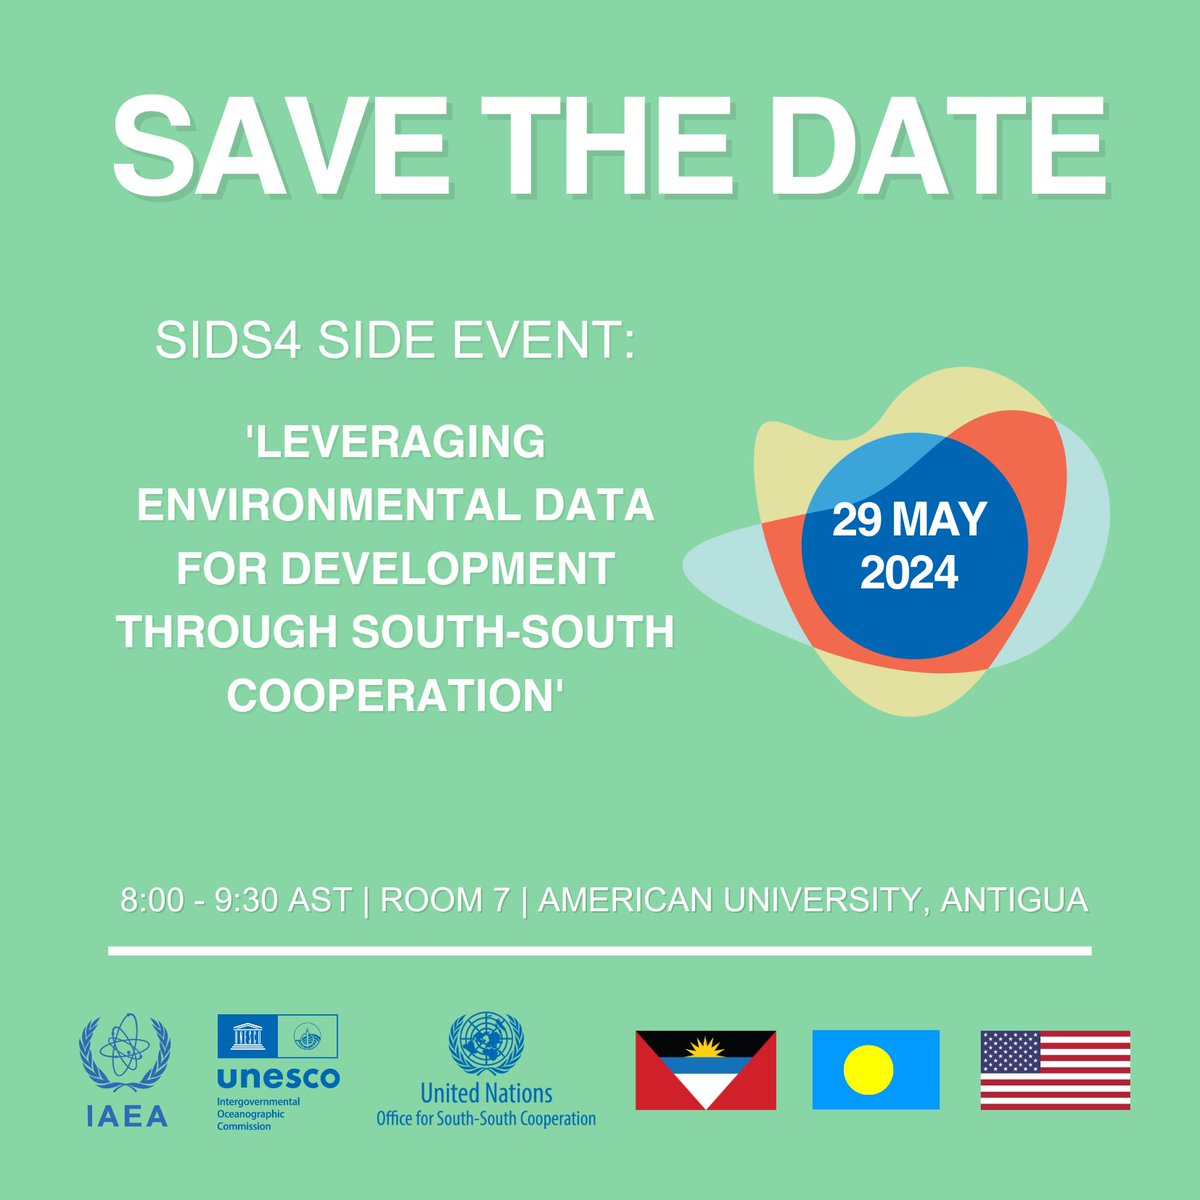 Join @IAEAorg and partners at #SIDS4 for a discussion on data for development in SIDS, including the key roles of science and technology and #SouthSouthCooperation in tackling environmental challenges 🗓️29 May 2024 🕗8:00-9:30 AST 🇦🇬 Room 7, American University of Antigua